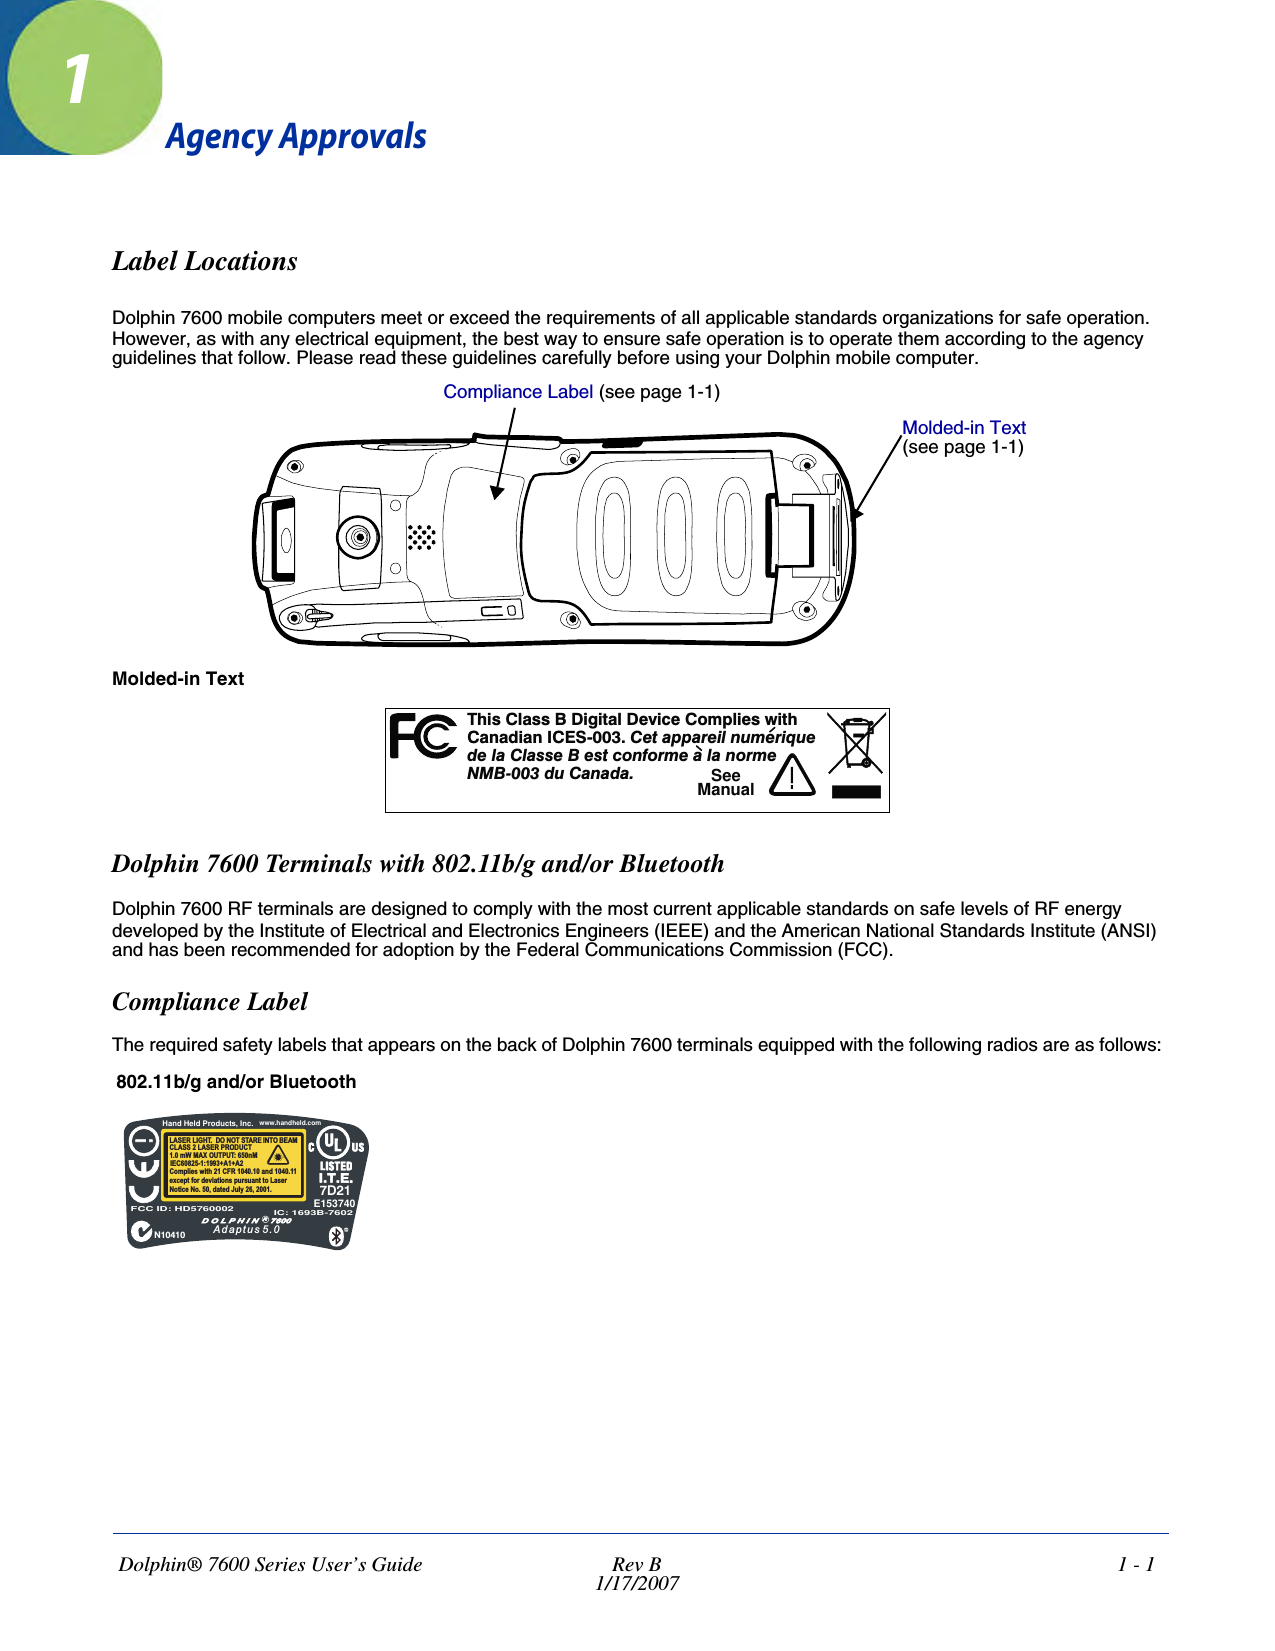 Dolphin® 7600 Series User’s Guide  Rev B1/17/20071 - 11Agency ApprovalsLabel LocationsDolphin 7600 mobile computers meet or exceed the requirements of all applicable standards organizations for safe operation. However, as with any electrical equipment, the best way to ensure safe operation is to operate them according to the agency guidelines that follow. Please read these guidelines carefully before using your Dolphin mobile computer. Molded-in TextDolphin 7600 Terminals with 802.11b/g and/or BluetoothDolphin 7600 RF terminals are designed to comply with the most current applicable standards on safe levels of RF energy developed by the Institute of Electrical and Electronics Engineers (IEEE) and the American National Standards Institute (ANSI) and has been recommended for adoption by the Federal Communications Commission (FCC). Compliance LabelThe required safety labels that appears on the back of Dolphin 7600 terminals equipped with the following radios are as follows:802.11b/g and/or BluetoothCompliance Label (see page 1-1)Molded-in Text (see page 1-1)hs a s i t D c Cm i tTiCl s B D gi al evi e o pl es wi hCndiI -00 eaai m ua a an CES 3. Ct pprelnu eriq ed l C s e B es con e a a ormea las t form l n e00 u n aNMB- 3dCaad.!SeeManualHand Held Product , Incs.LASER LIGHT. DO NOT STARE INTO BEAM1.0 mW MAX OUTPUT: 650nMIEC60825-1:1993+A1+A2CLASS 2 LASER PRODUCTComplies with 21 CFR 1040.10 and 1040.11except for deviations pursuant to LaserNotice No. 50, dated July 26, 2001.!FCC ID: HD5760002 IC: 1693B-7602Adaptus 5.0N10410www.handheld.com7D21E153740